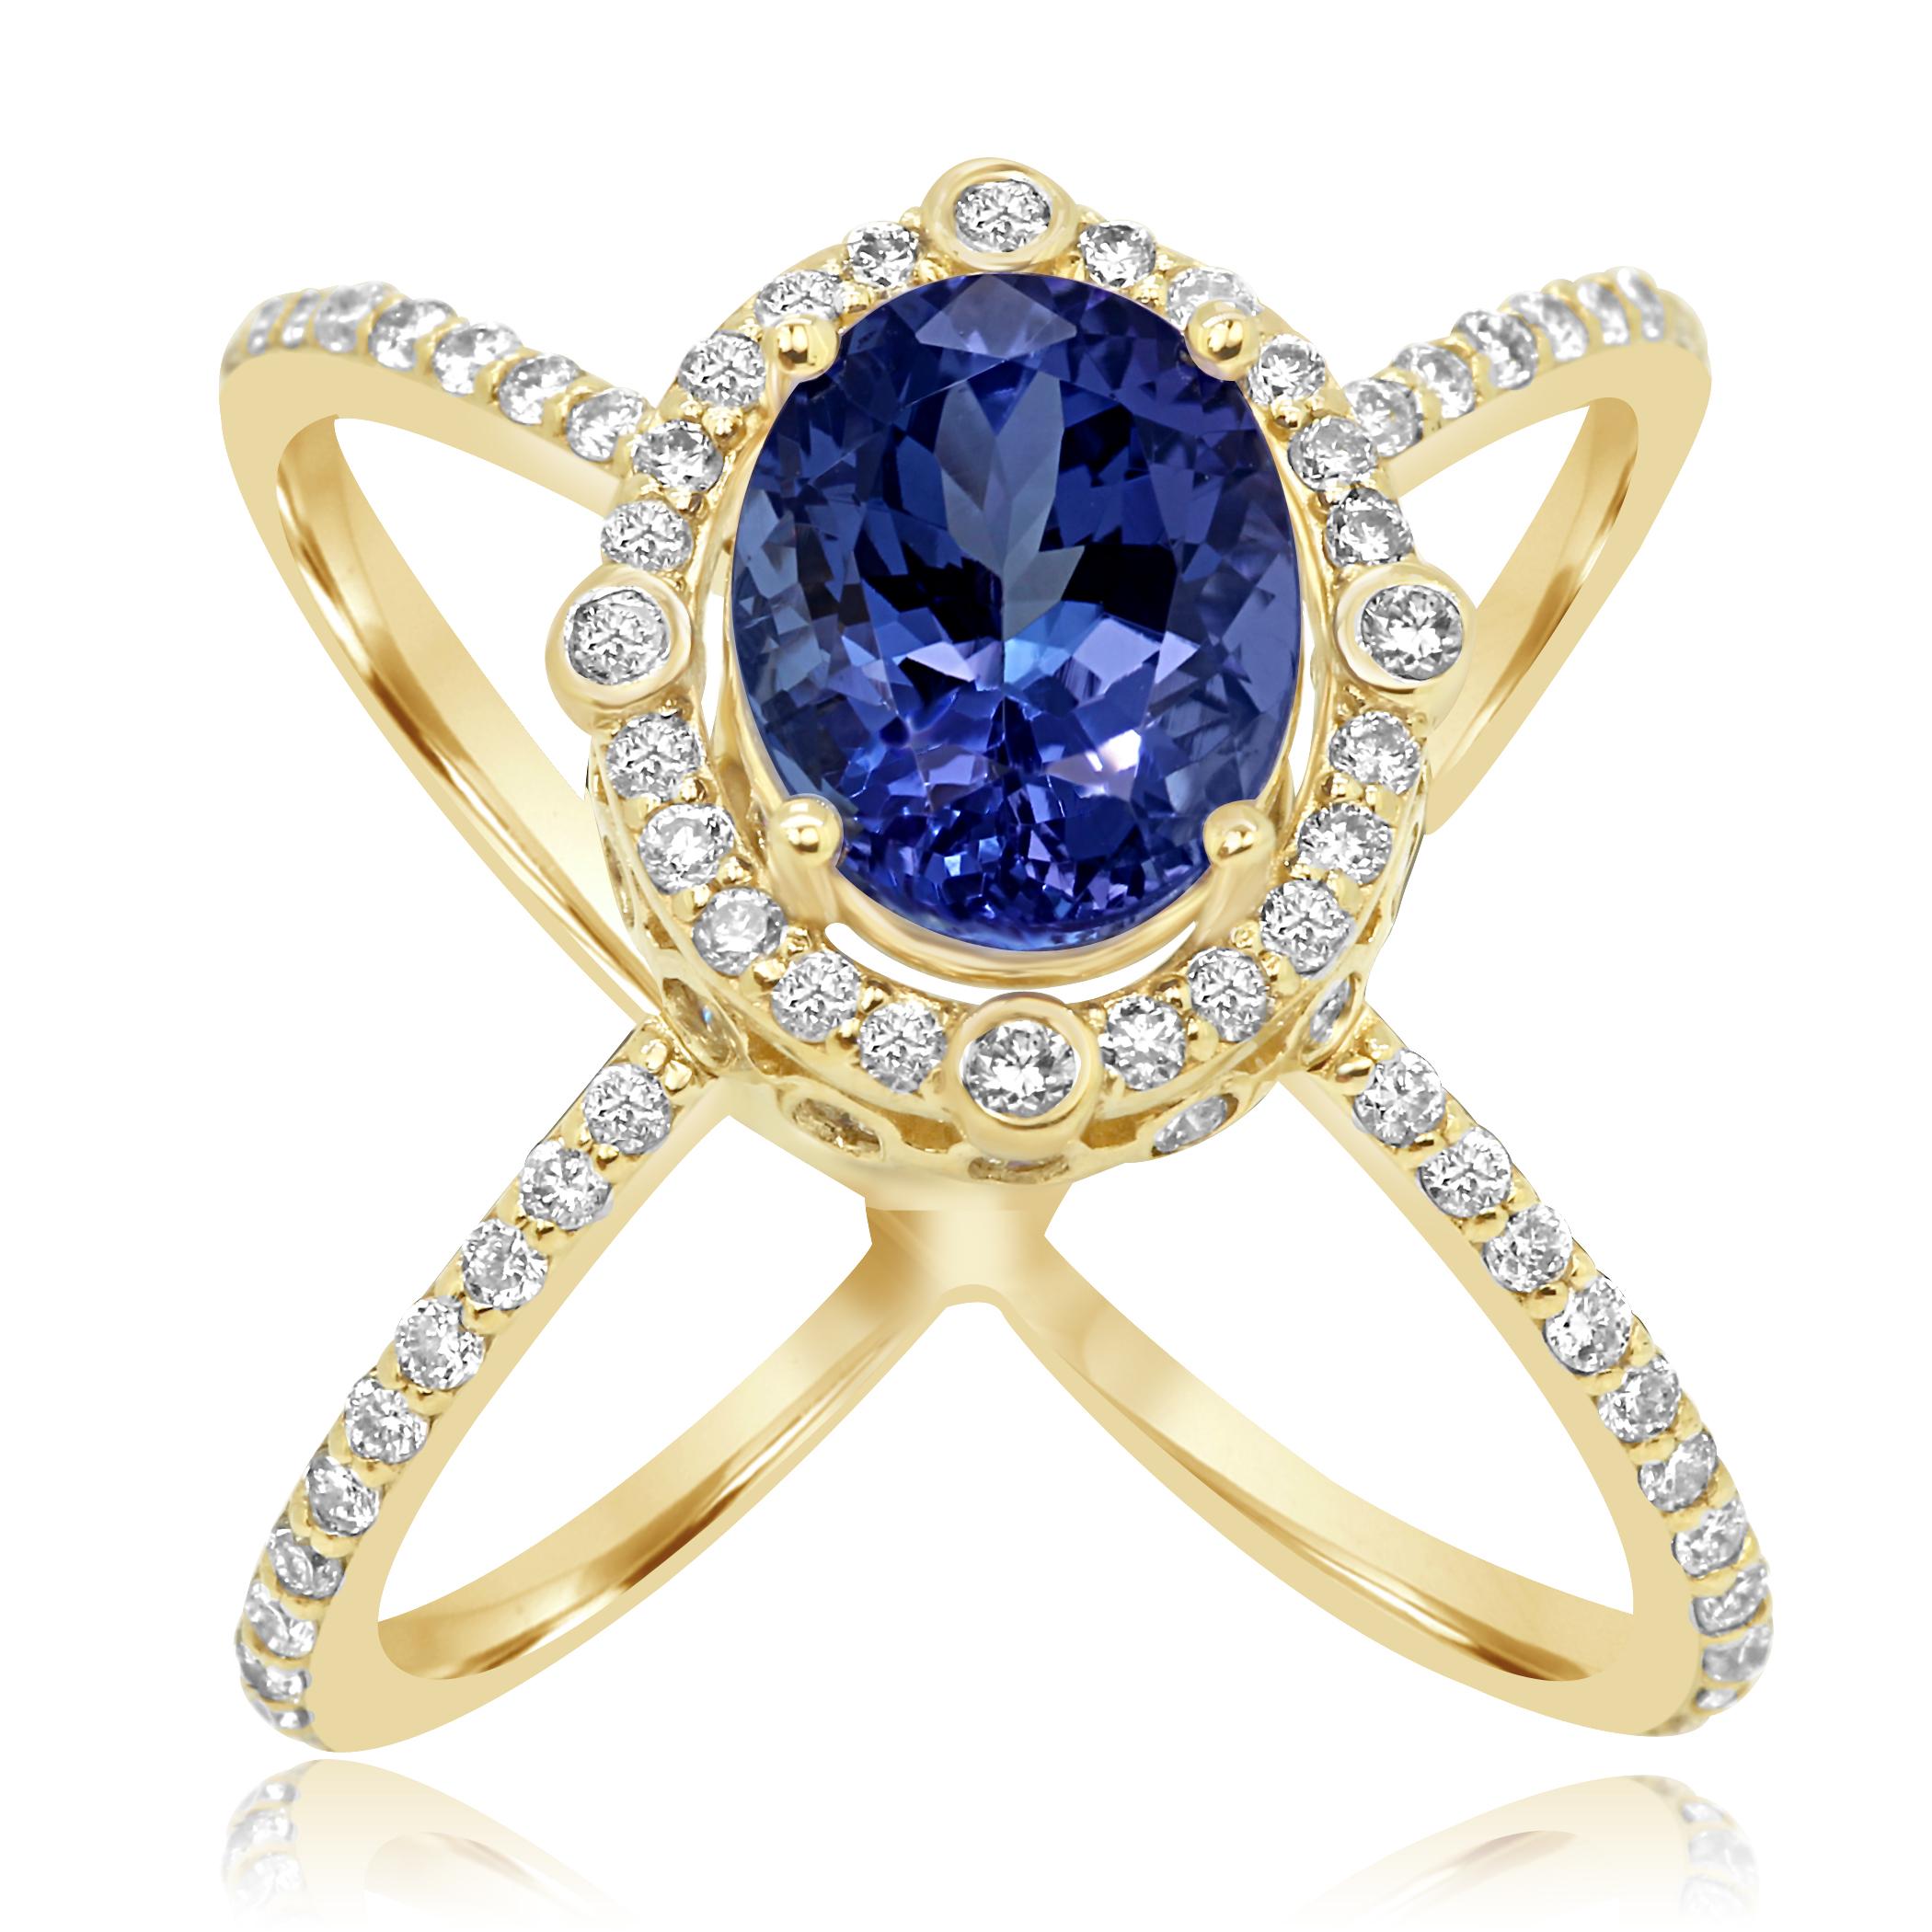 Stylish Tanzanite Oval 3.17 Carat Encircled in Diamond Halo 1.00 Carat in 14K Yellow Gold Chic Ring.

Style available in different price ranges. Prices are based on your selection of 4C's Cut, Color, Carat, Clarity. Please contact us for more